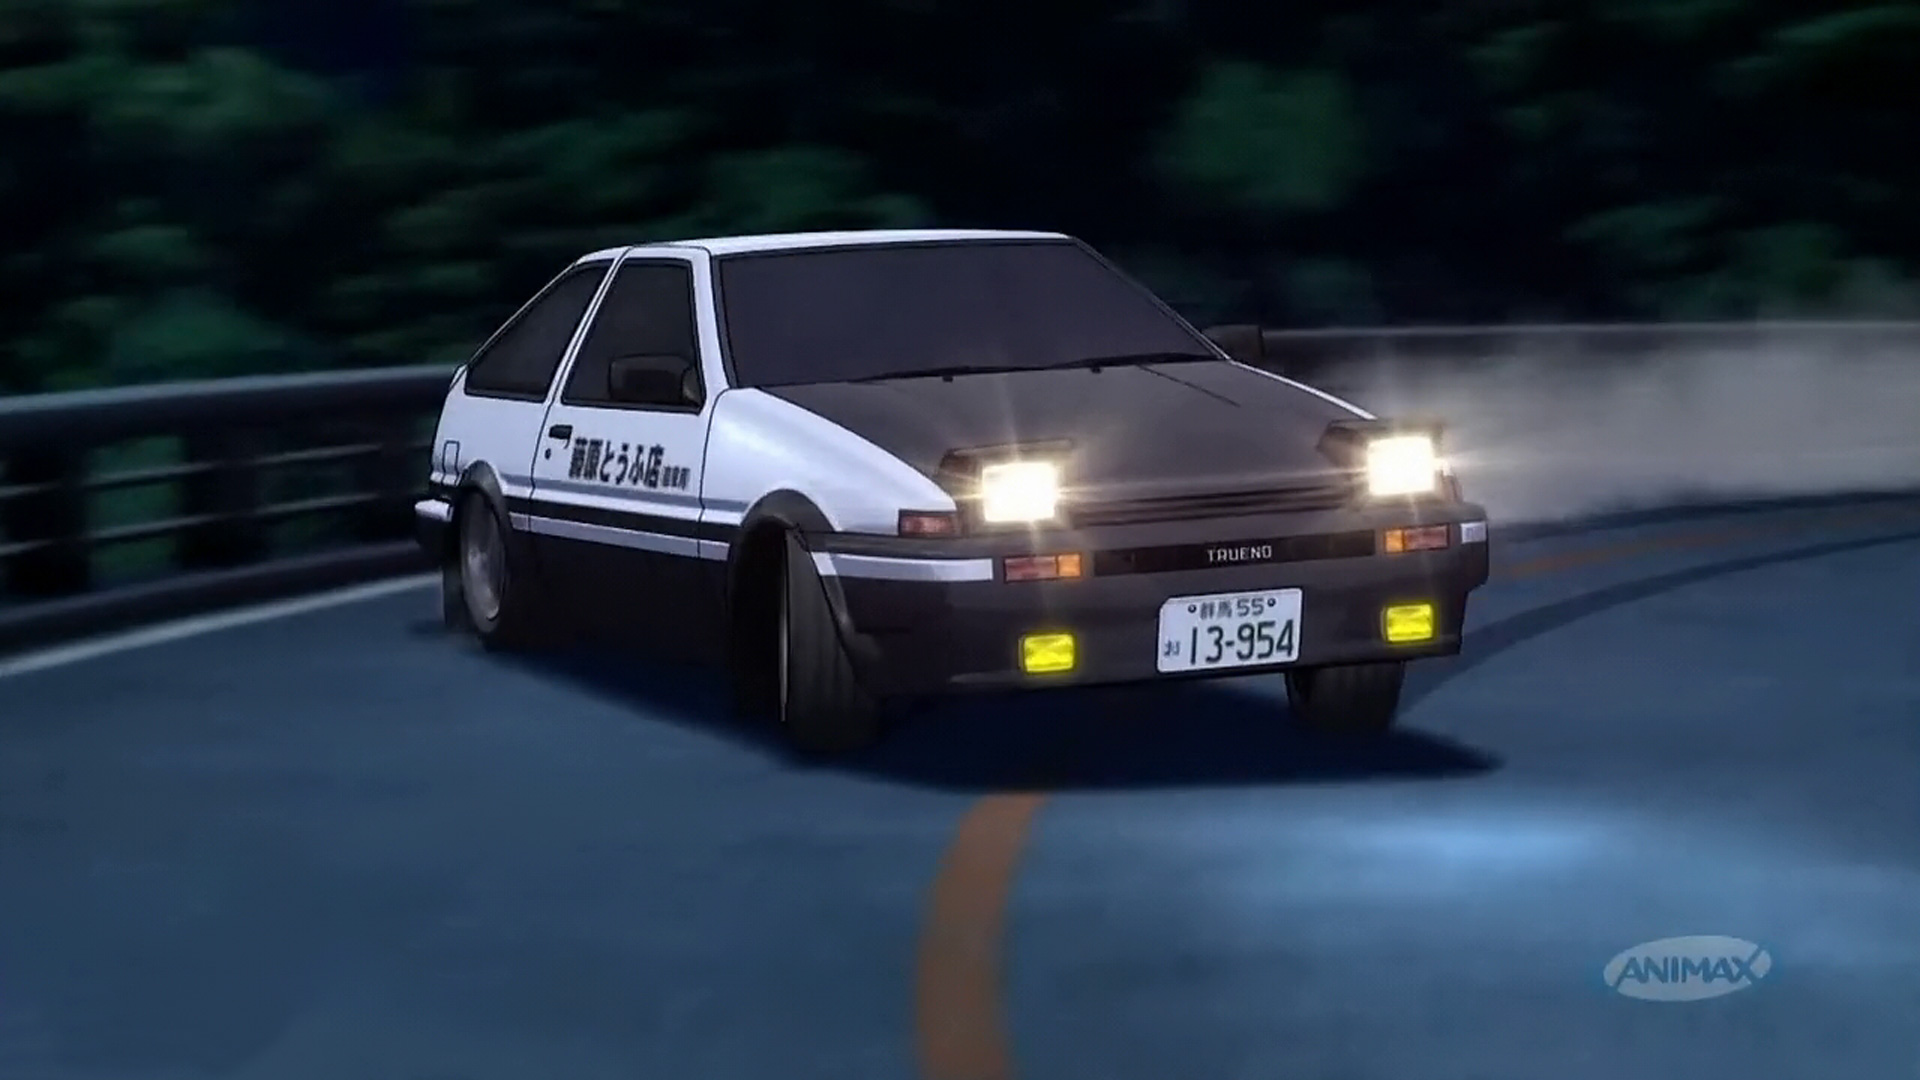 Free Download Initial D Wallpaper Hd 19x1080 For Your Desktop Mobile Tablet Explore 68 Initial D Wallpapers Initial D Wallpaper Hd Initial Wallpaper For Computer Cute Wallpapers With Initials